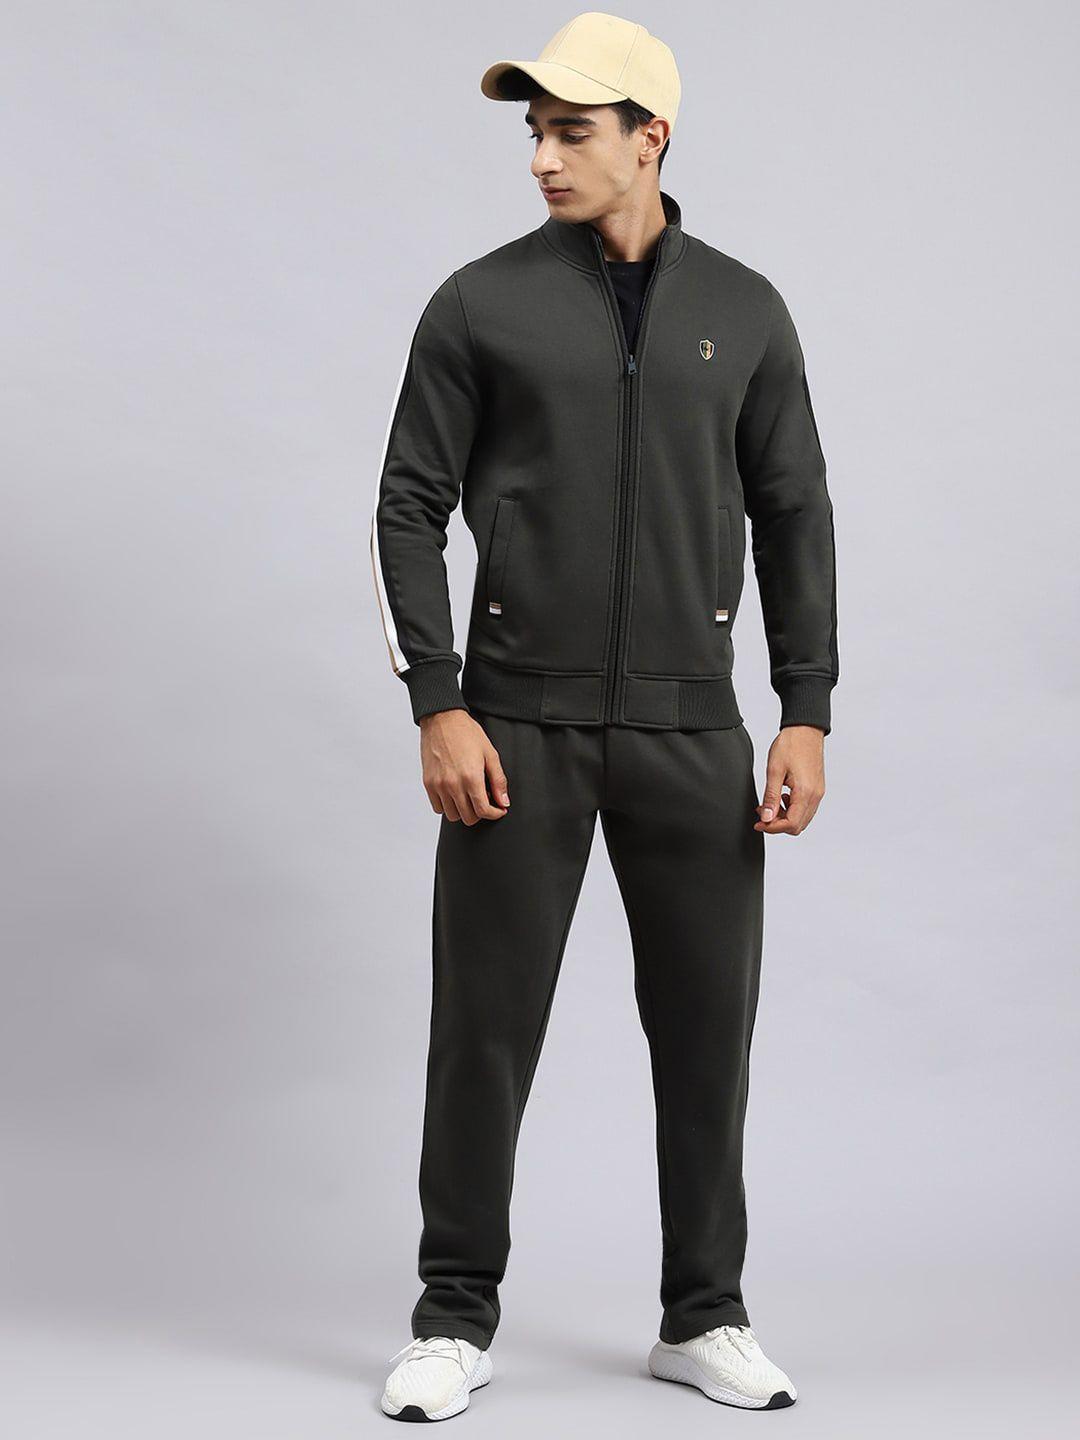 monte carlo mock collar long sleeves tracksuits